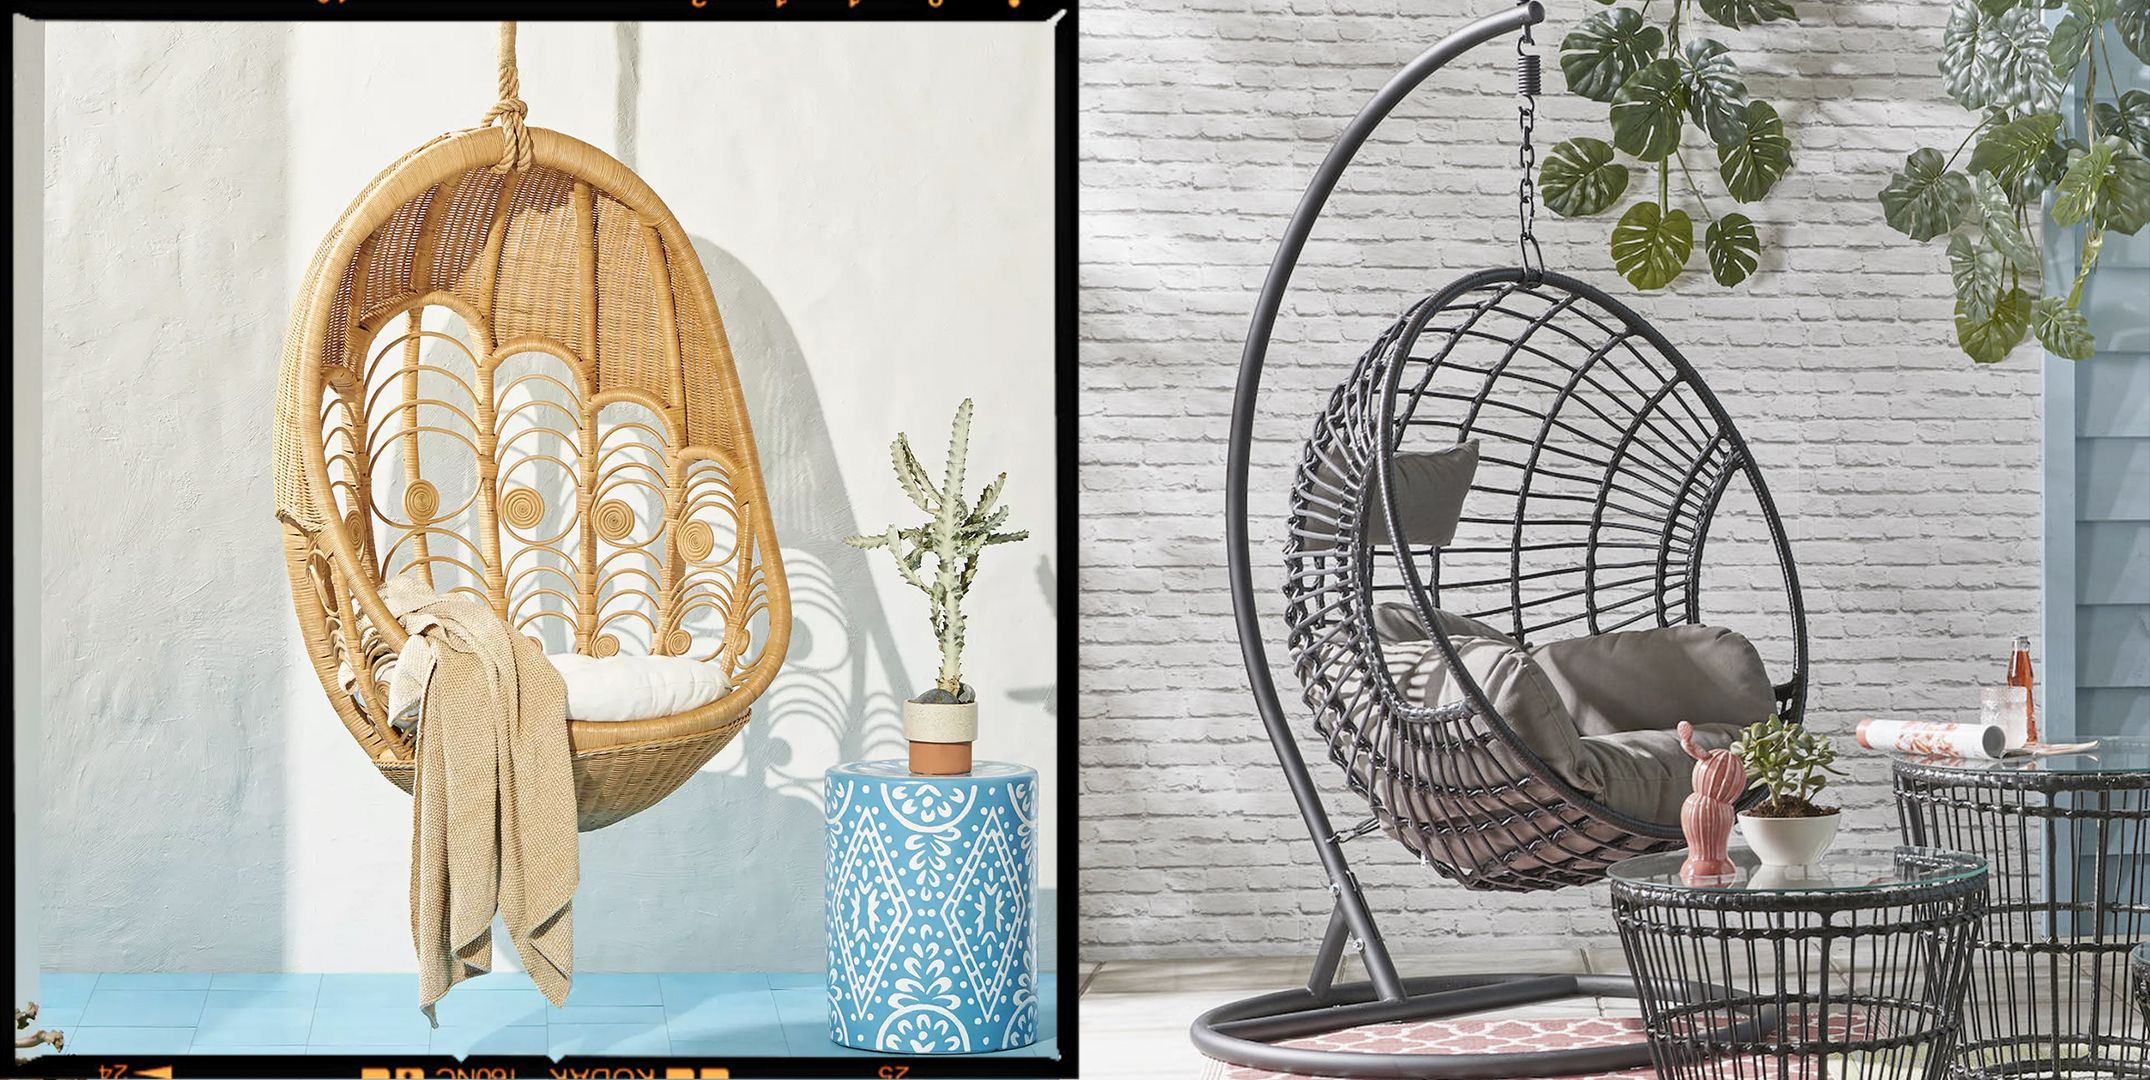 Source Round Rattan Bird Nest Balcony Adult Cheap Outdoor Indoor Wicker  Cocoon Hanging Swing Egg Chair With Stand on m.